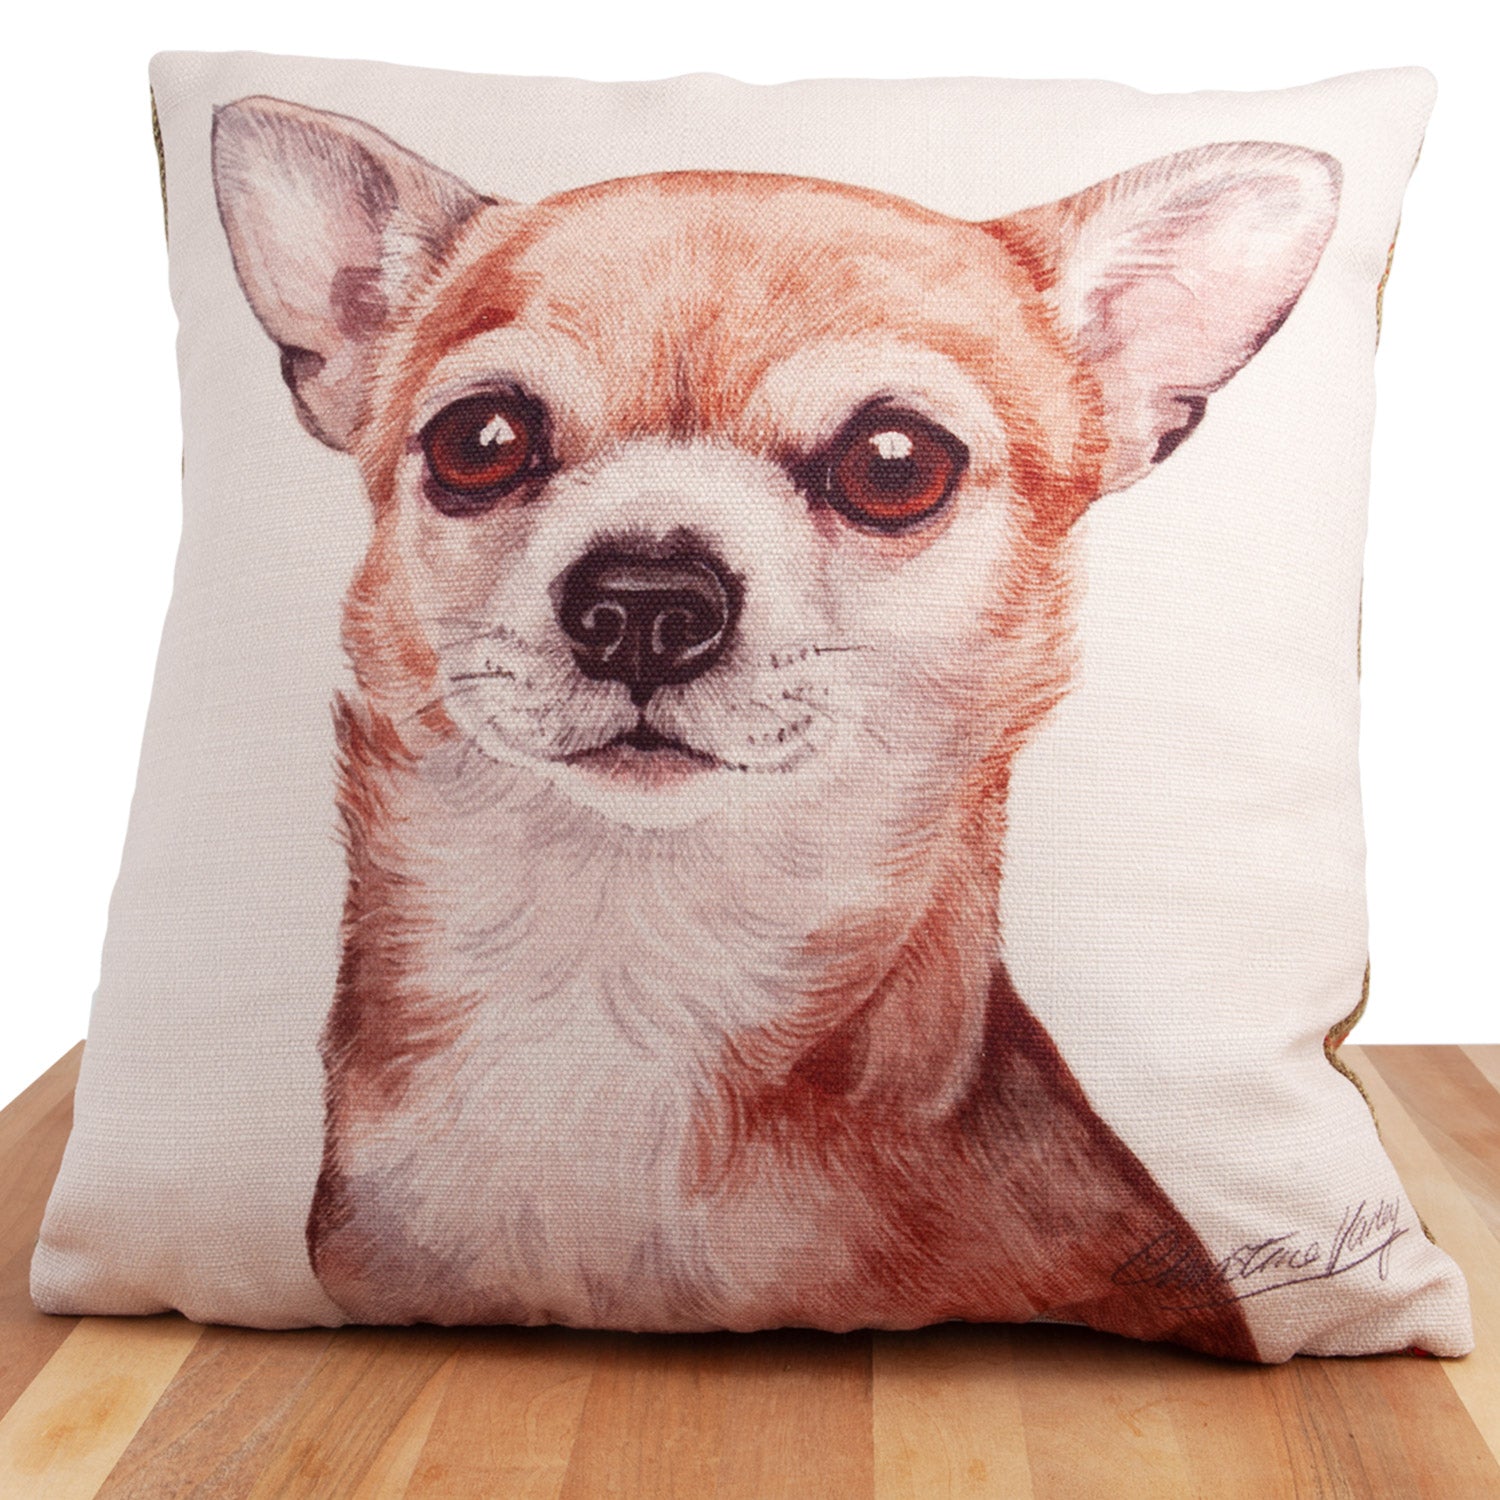 Dog Lover Gifts available at Dog Krazy Gifts. Chihuahua Cushion, part of our Christine Varley collection – available at www.dogkrazygifts.co.uk